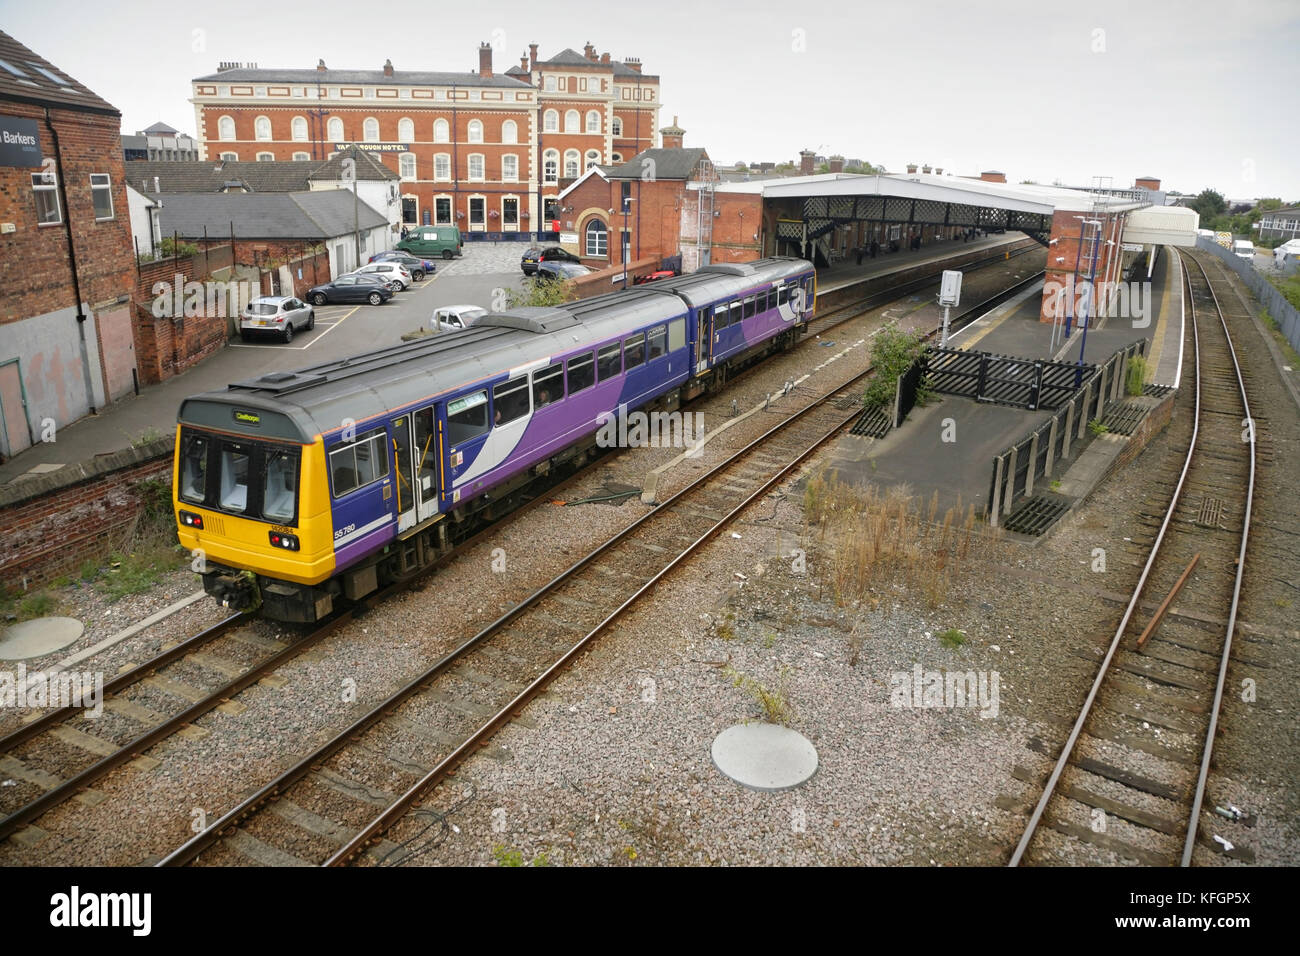 Northern Rail class 142 diesel multiple unit arriving at Grimsby Town station, UK with the Yarborough Hotel behind. Stock Photo